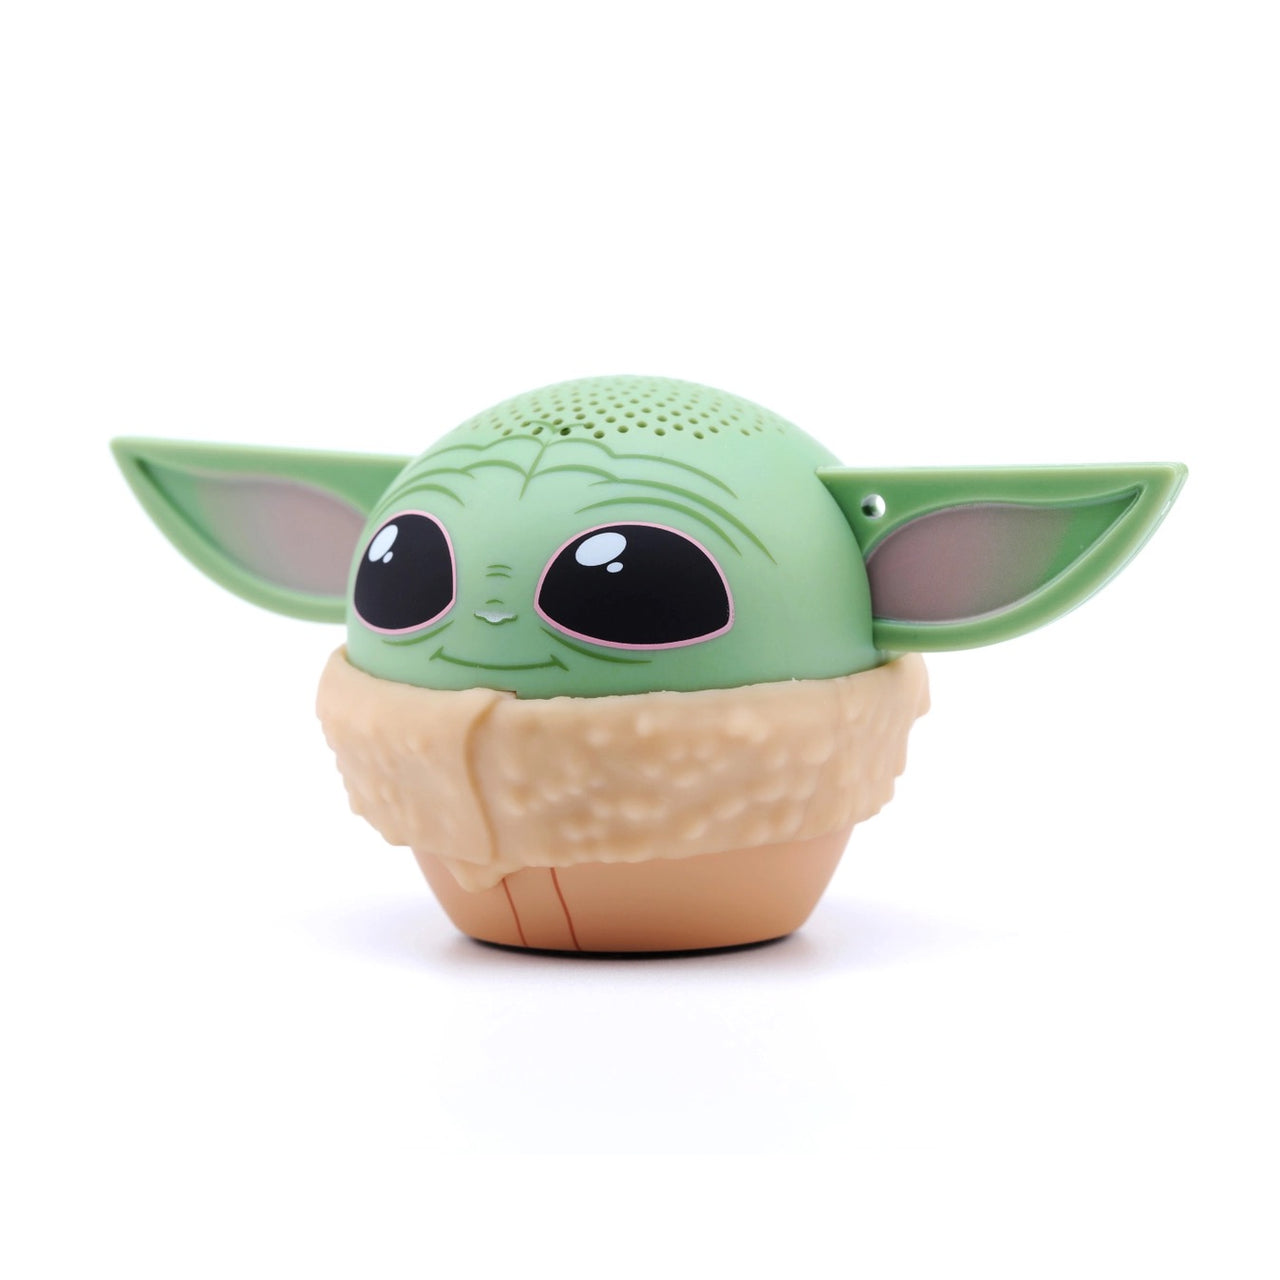 The Child - Bitty Boomers Collectable Bluetooth Speaker